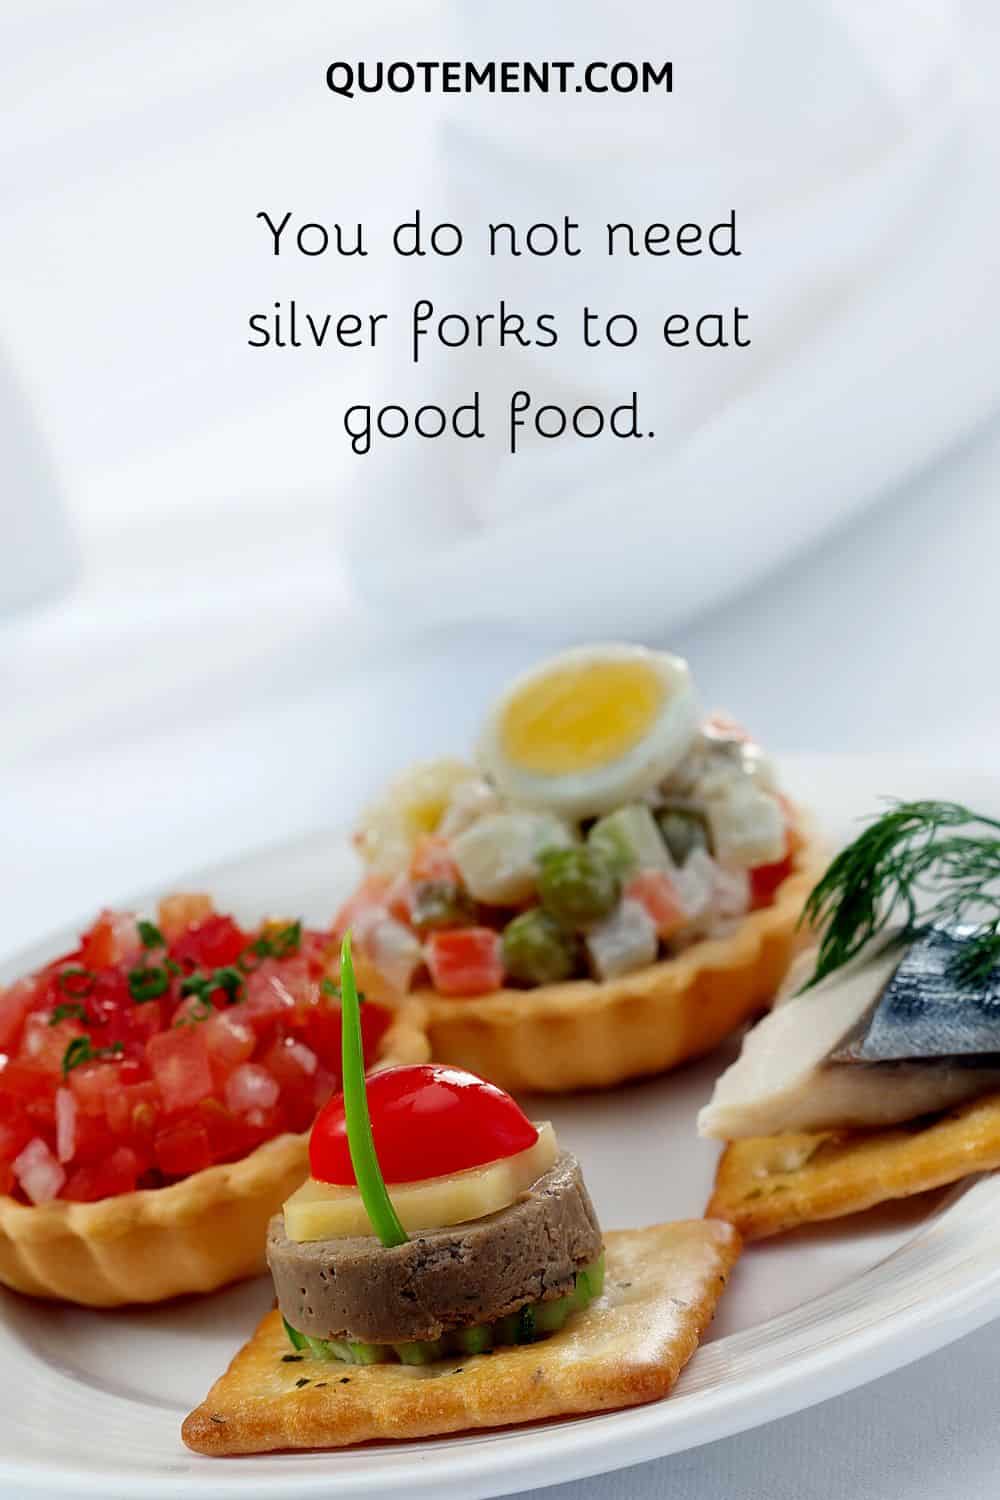 You do not need silver forks to eat good food.